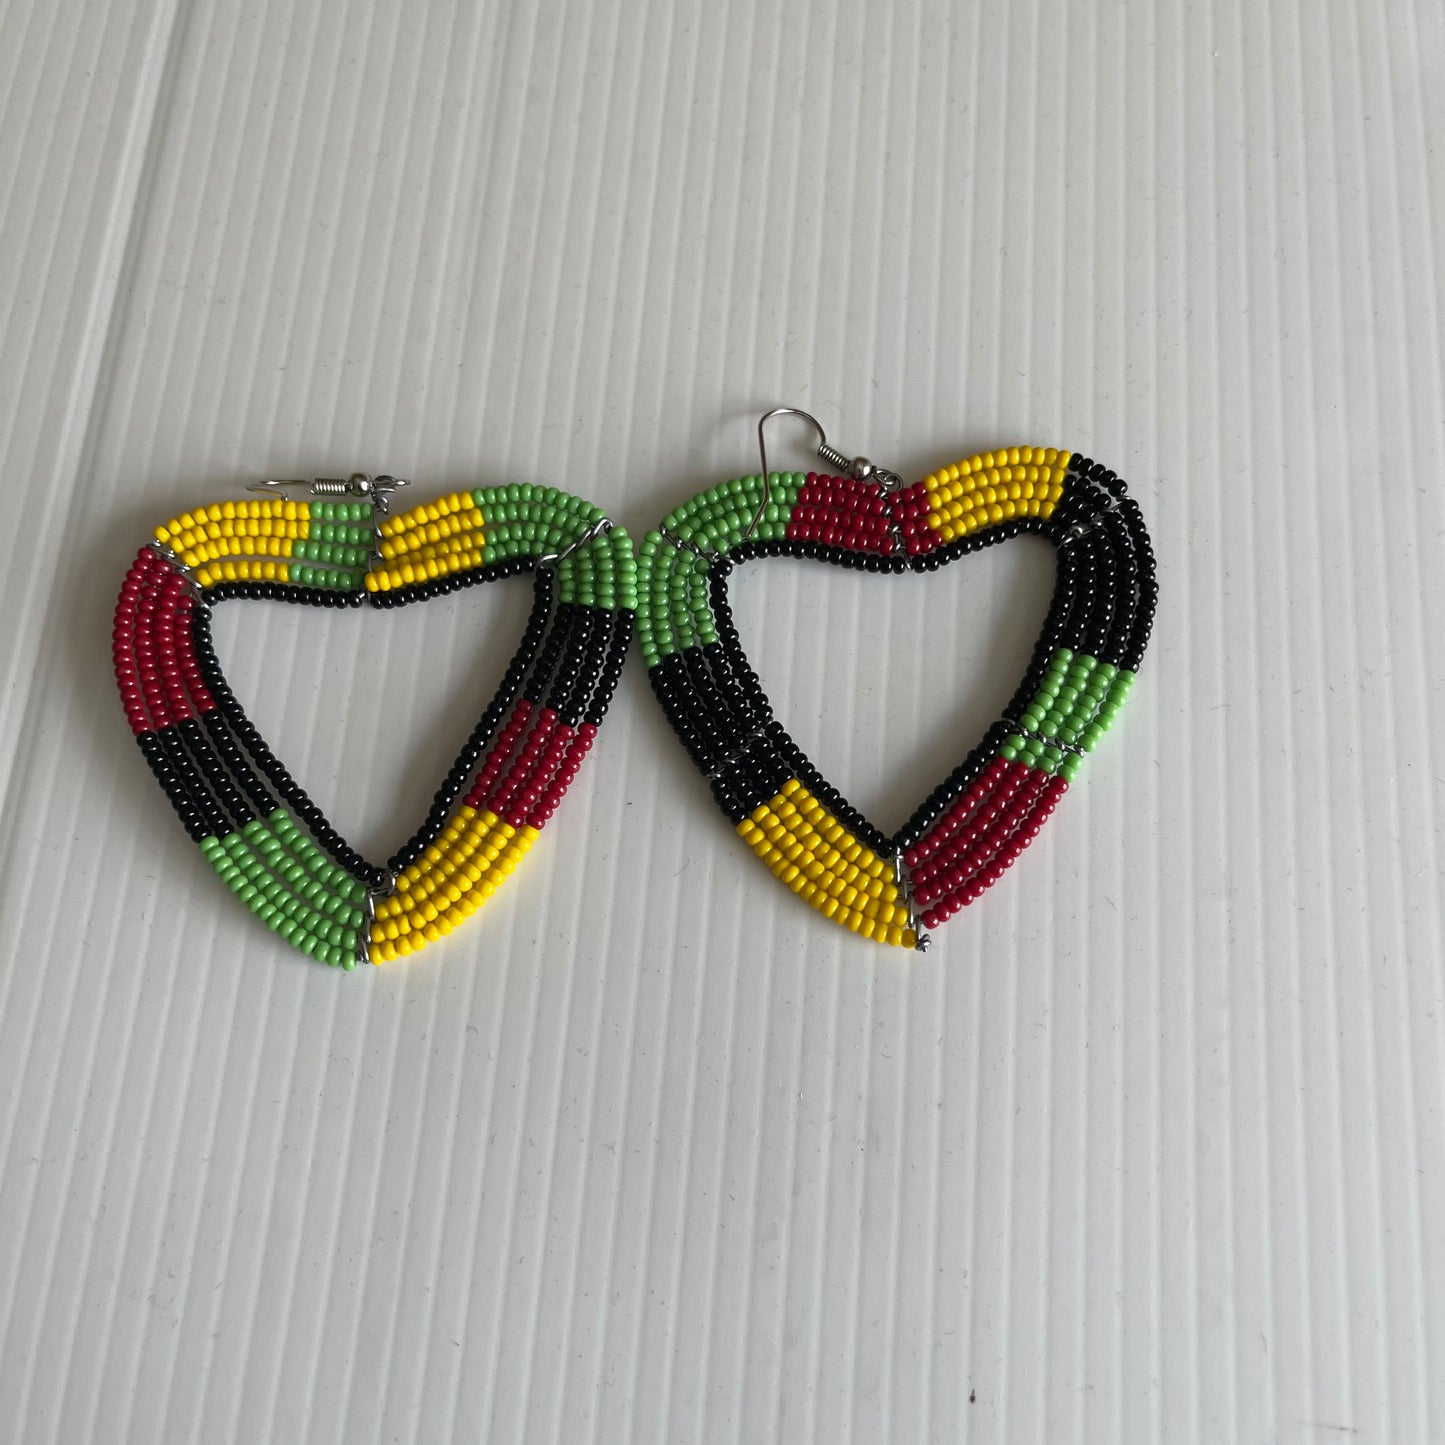 Red, yellow, green and black coloured Kenyan earrings